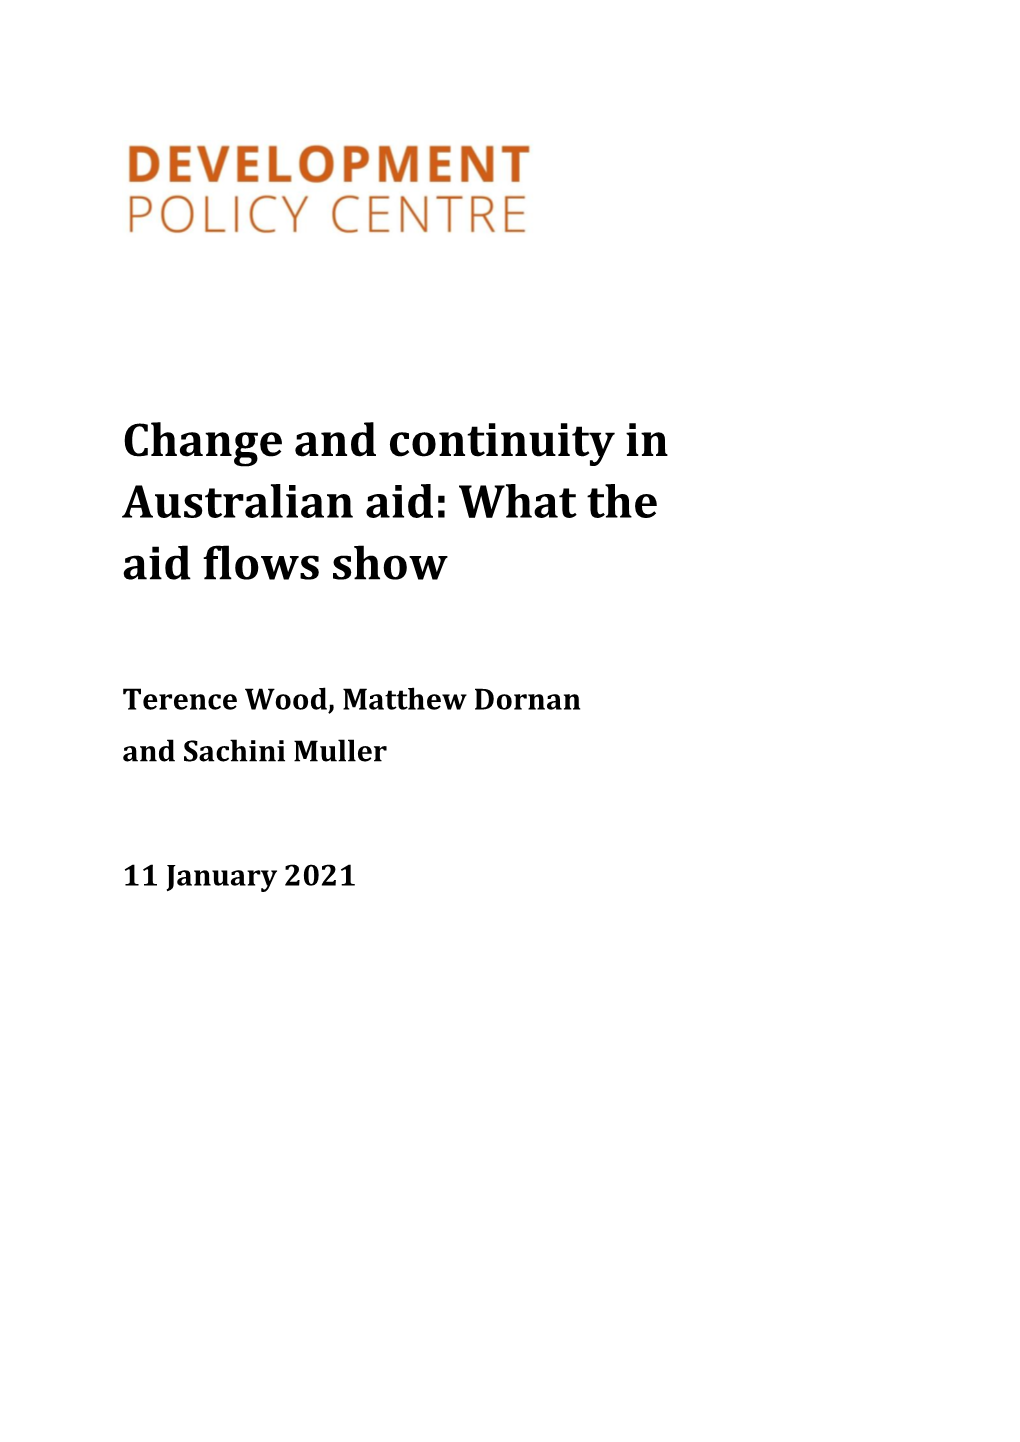 Change and Continuity in Australian Aid: What the Aid Flows Show